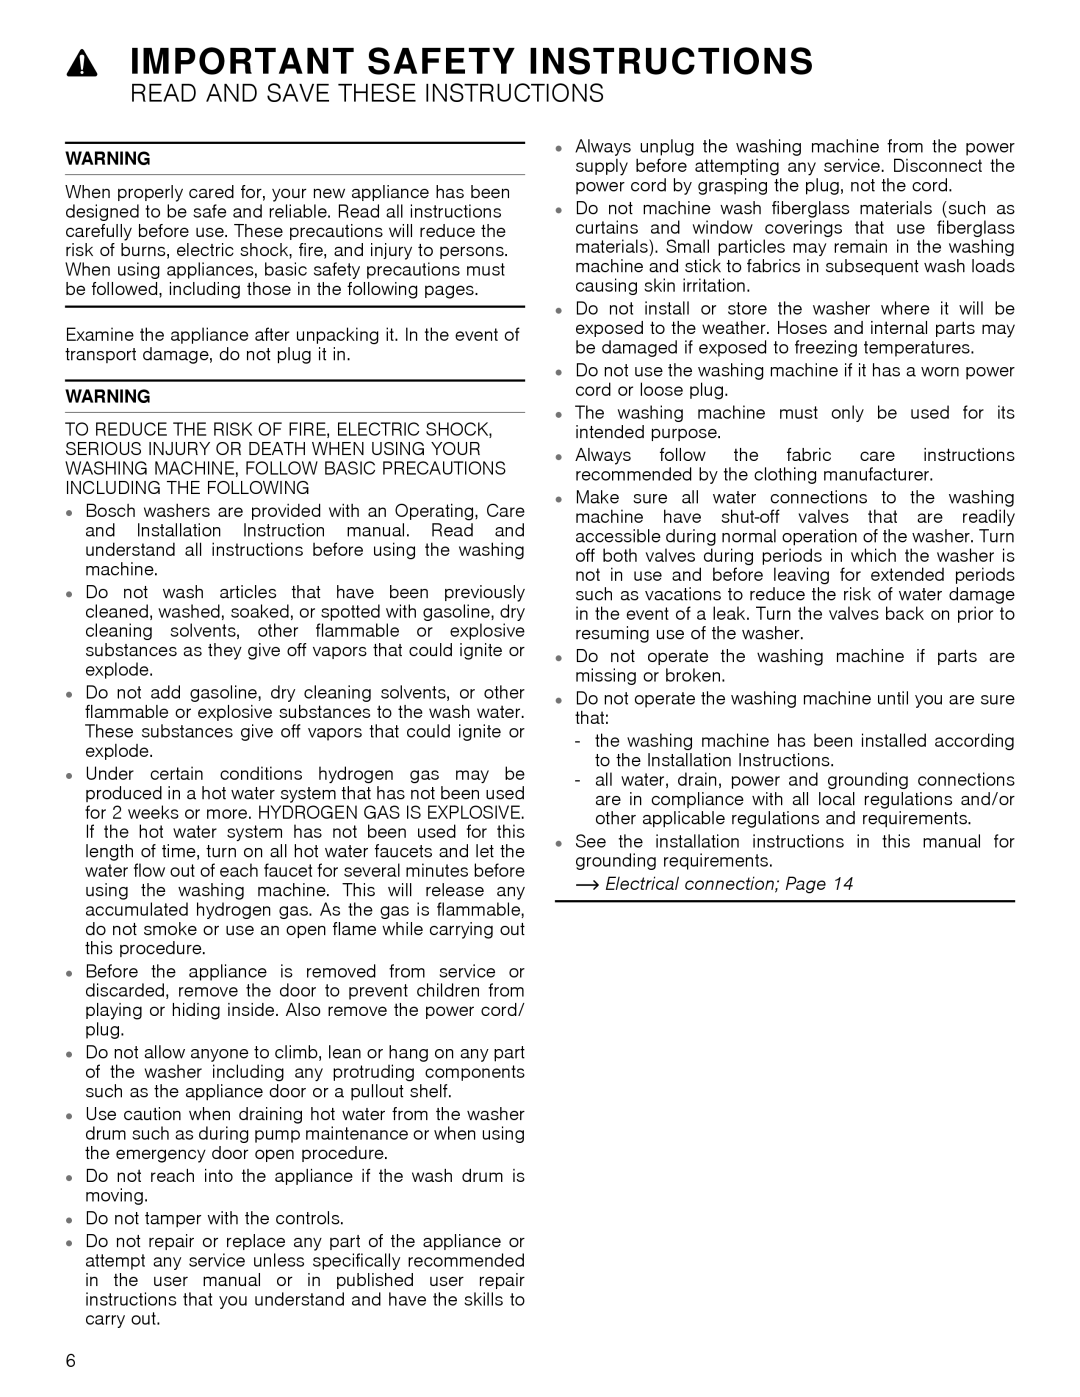 Bosch Appliances WAP24201UC Important Safety Instructions, Read And Save These Instructions, ~ Electrical connection Page 